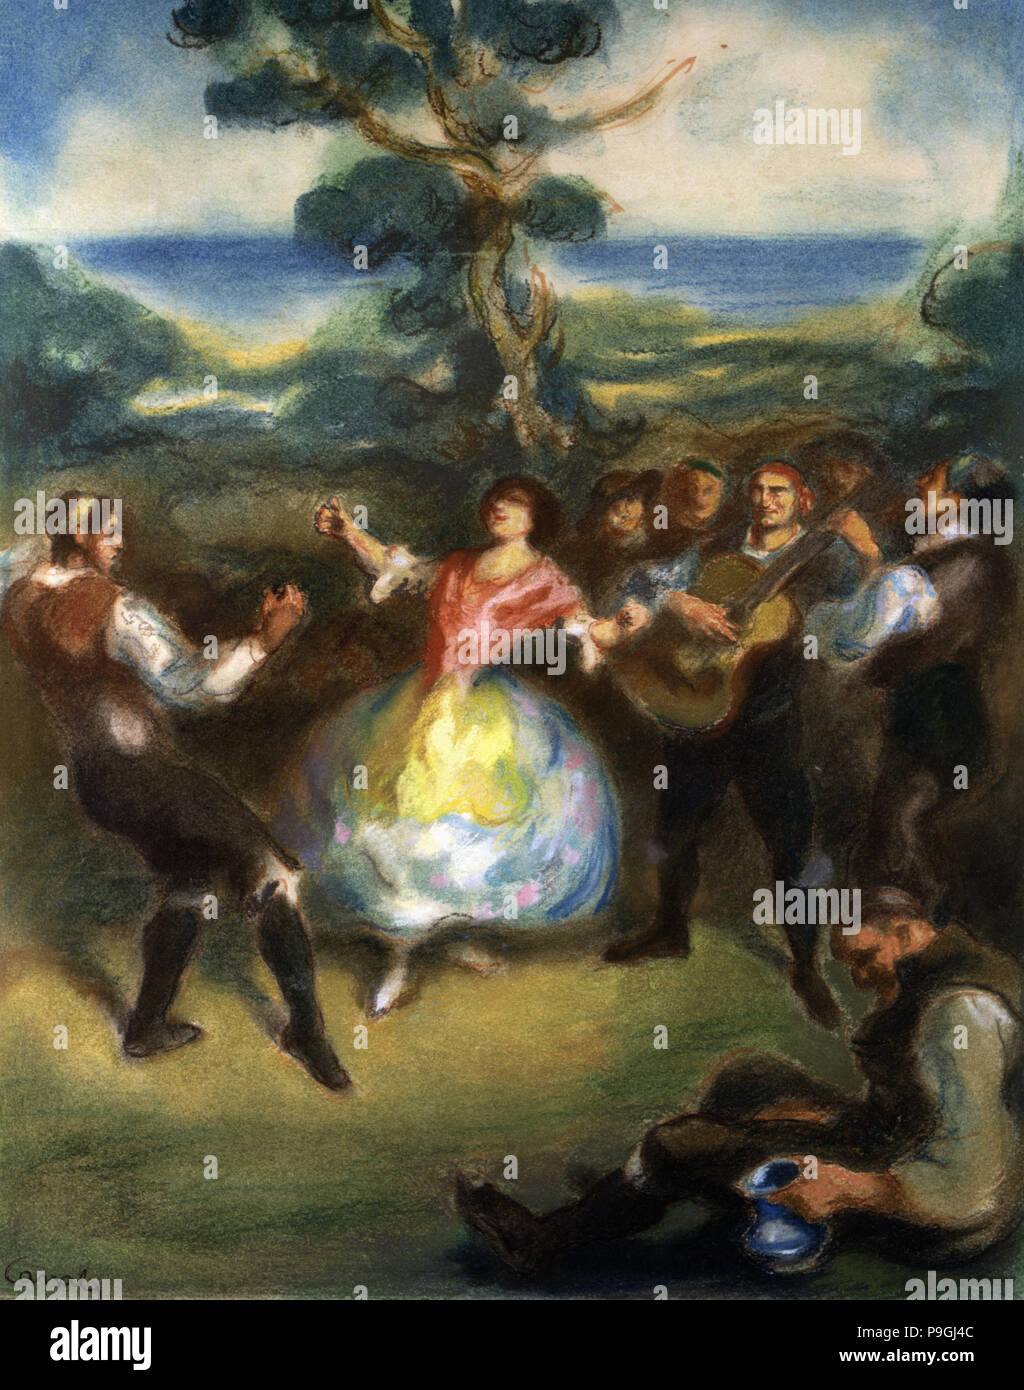 'The Jota' (Spanish dance), 1911 pastel drawing by Ricardo Canals. Stock Photo